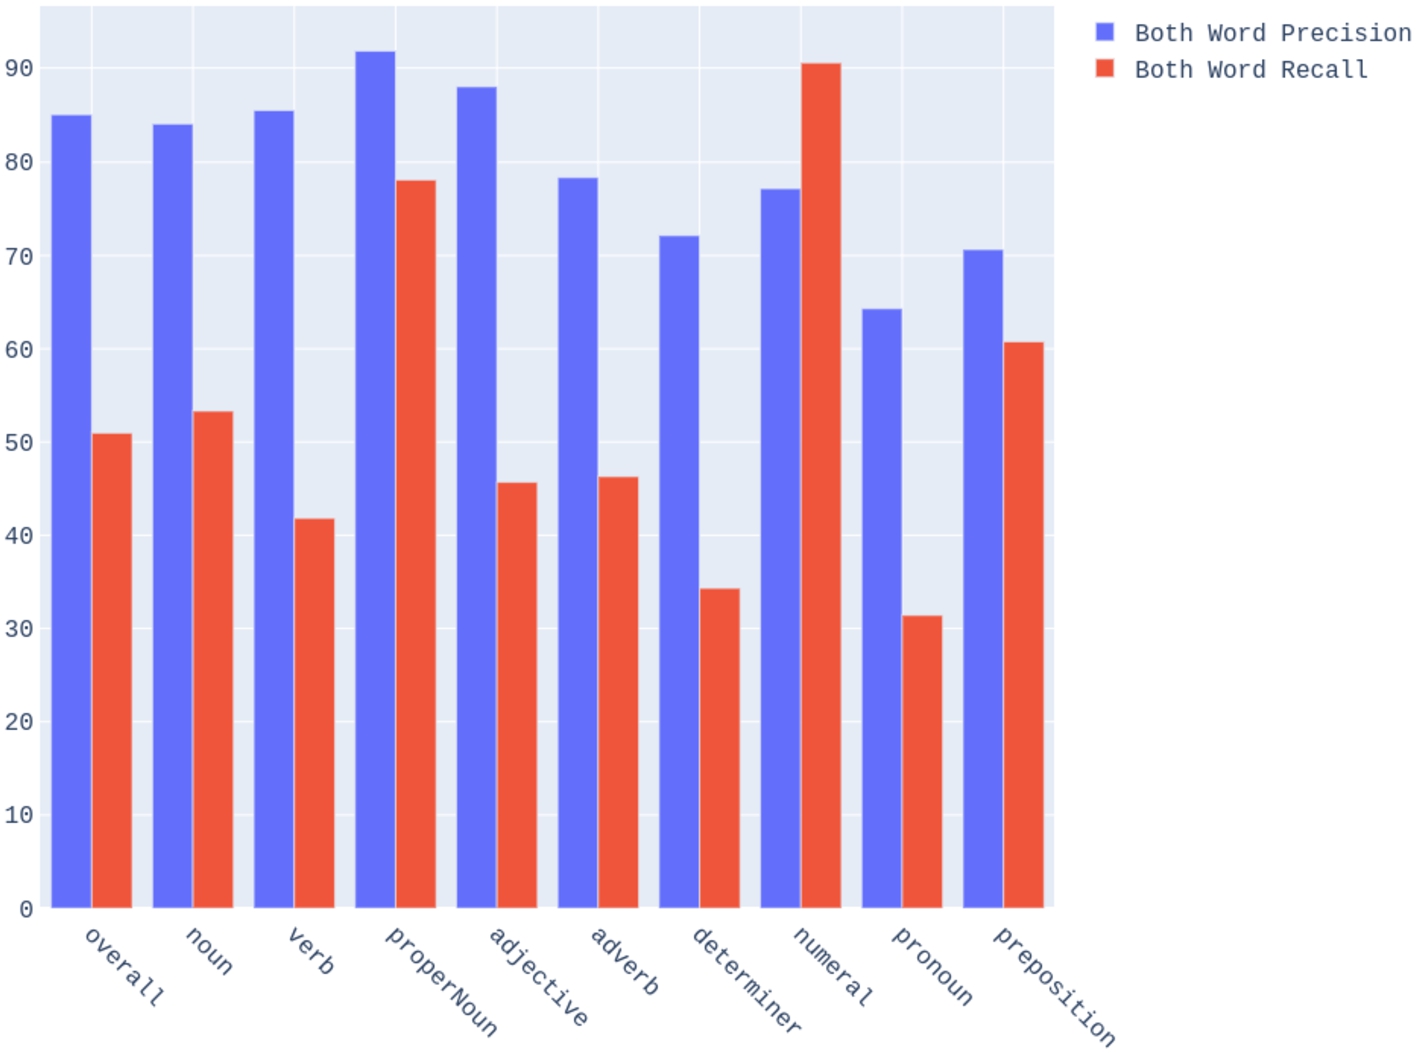 Breakdown by POS of BWP (left bars) and BWR (right bars), averaged across language pairs in the development set.